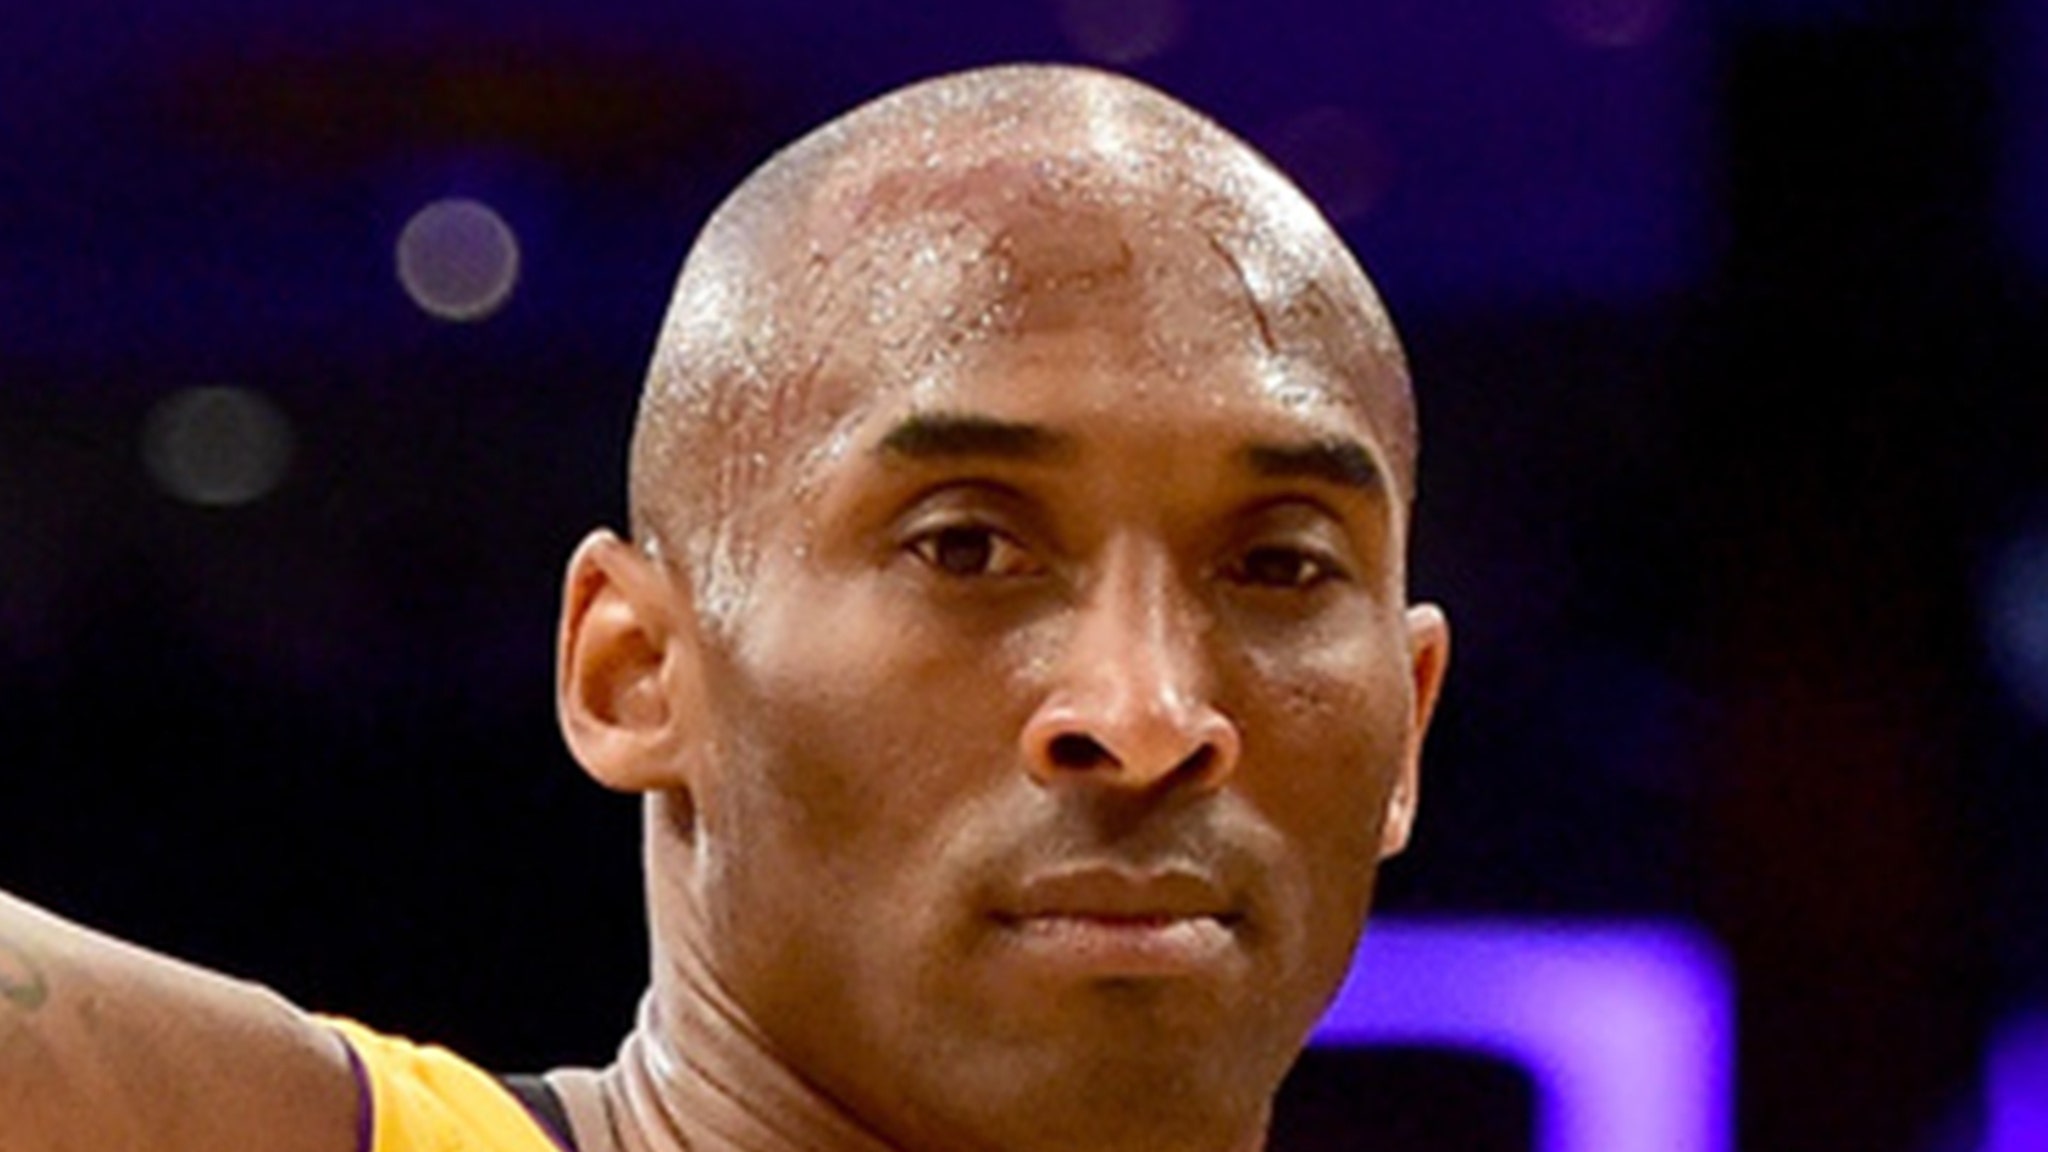 Cavs honors Kobe Bryant with emotional video during game against the Lakers